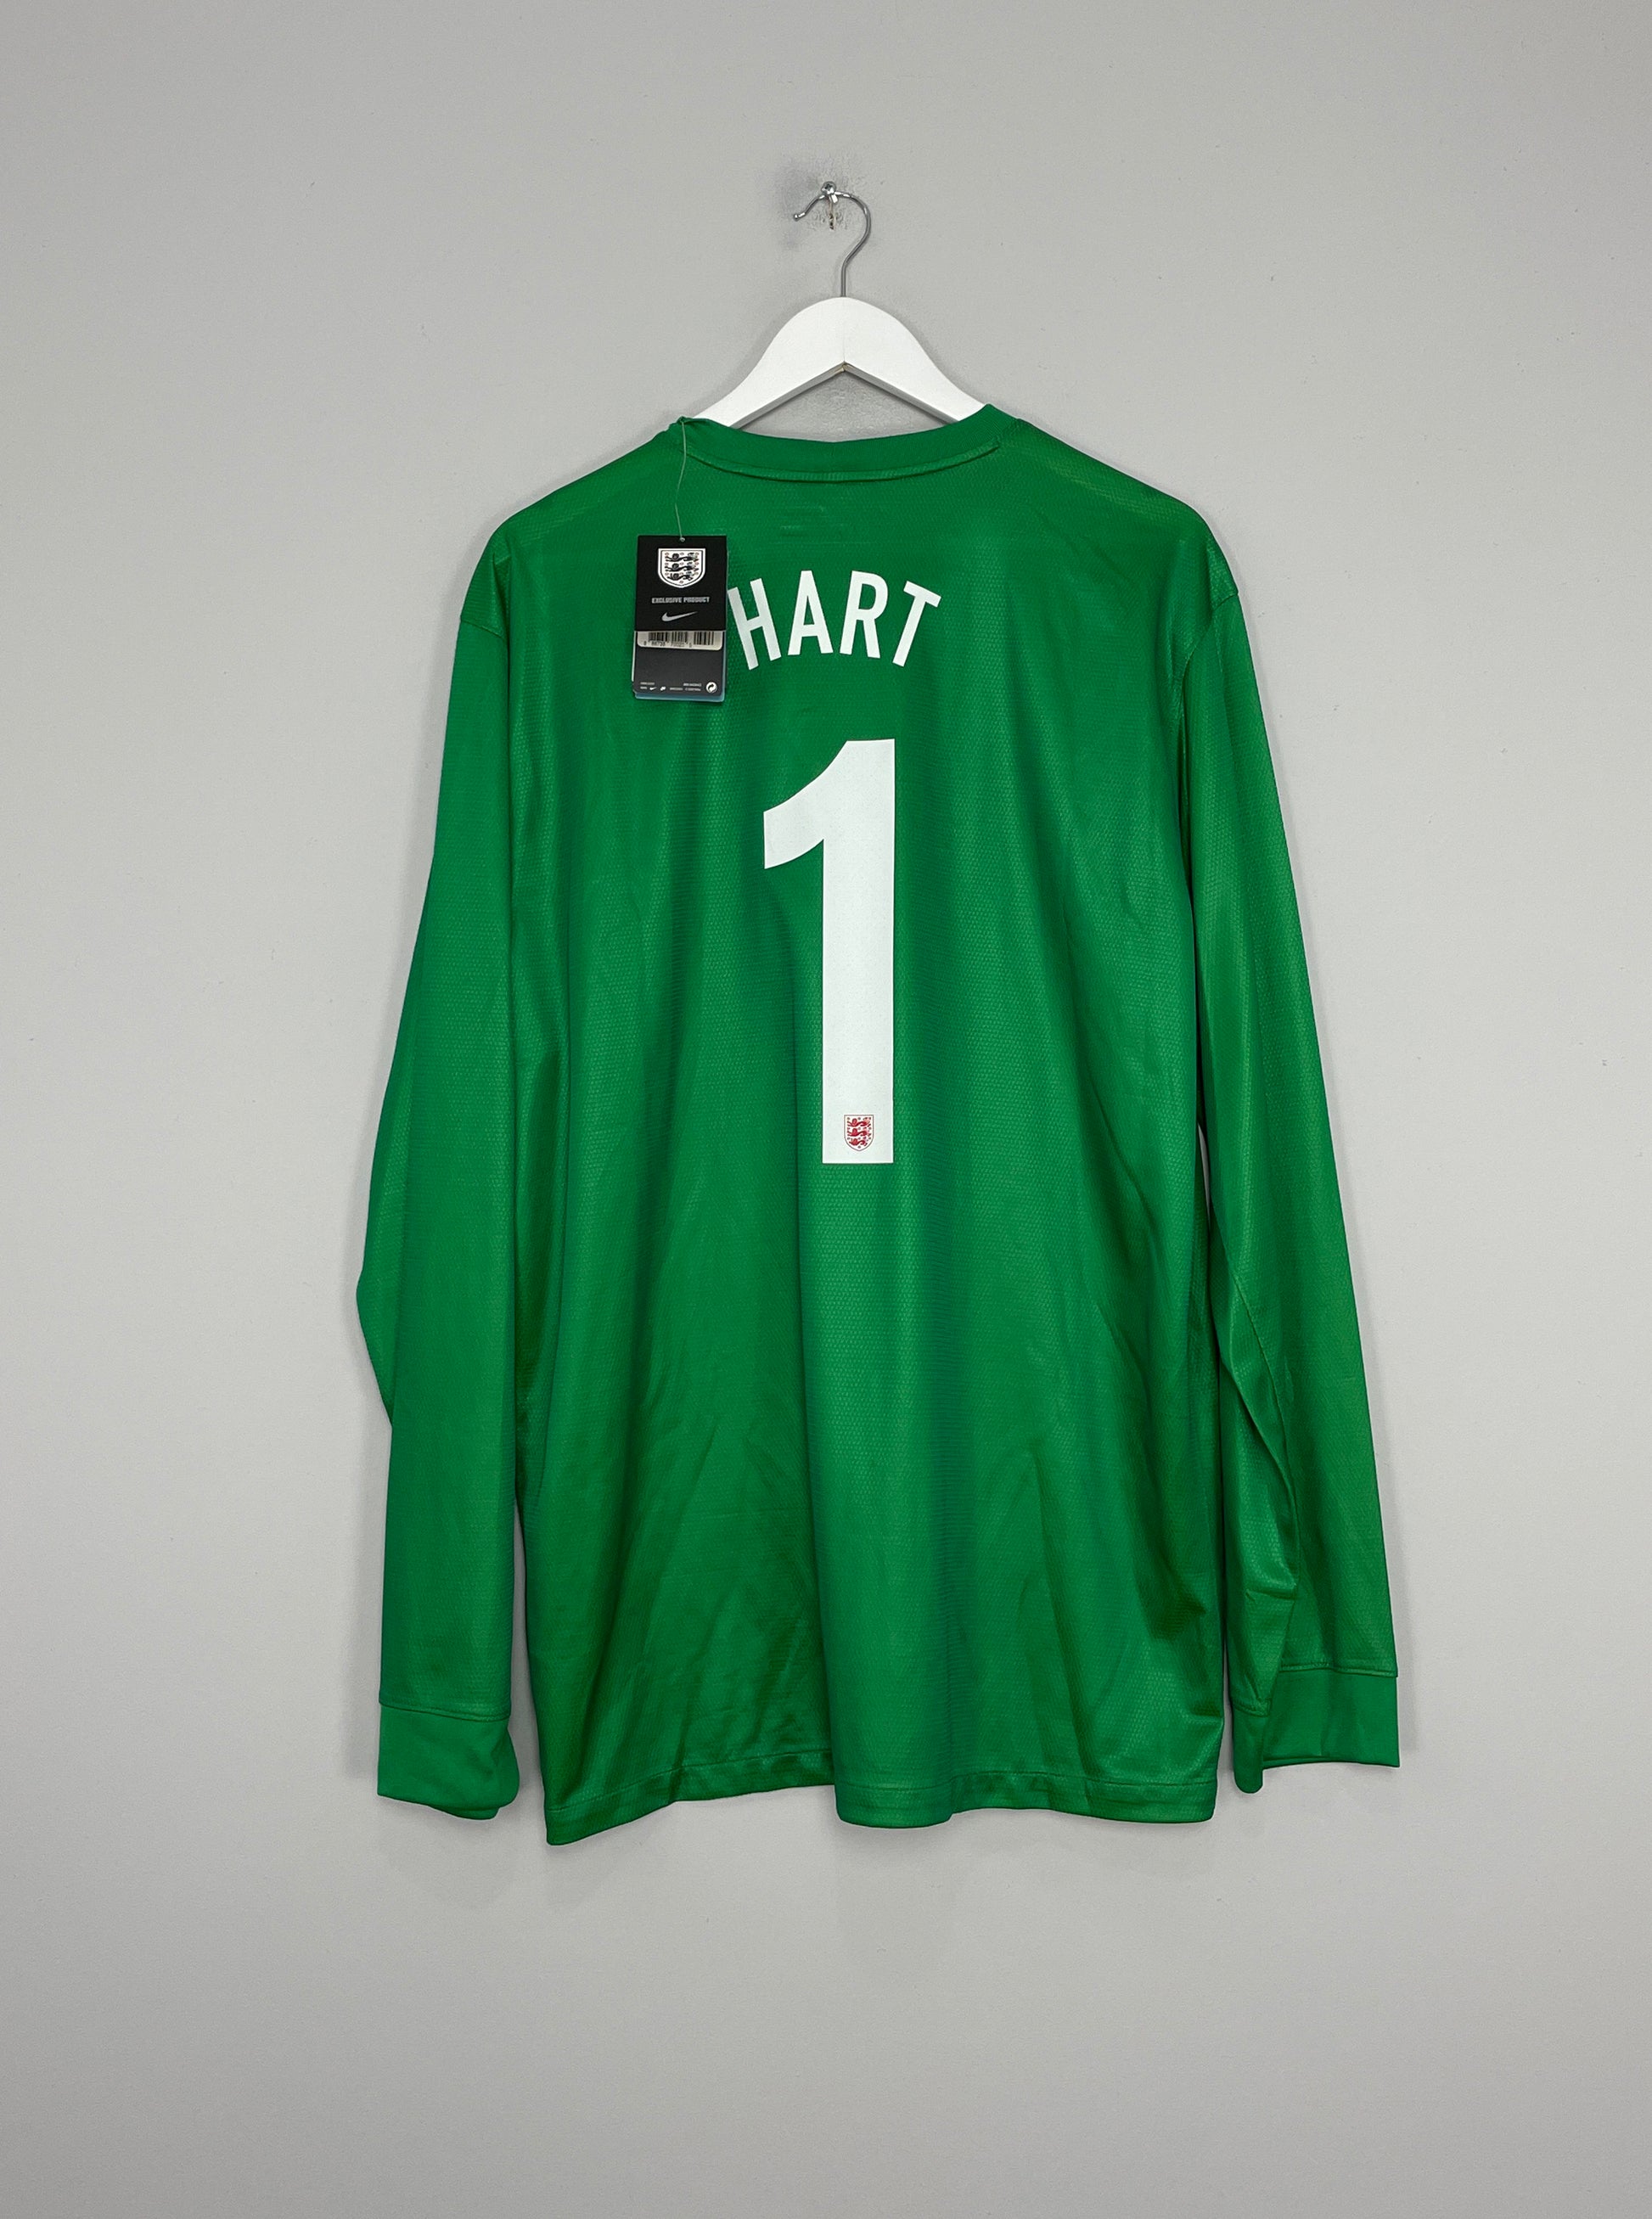 Image of the England Hart shirt from the 2013/14 season